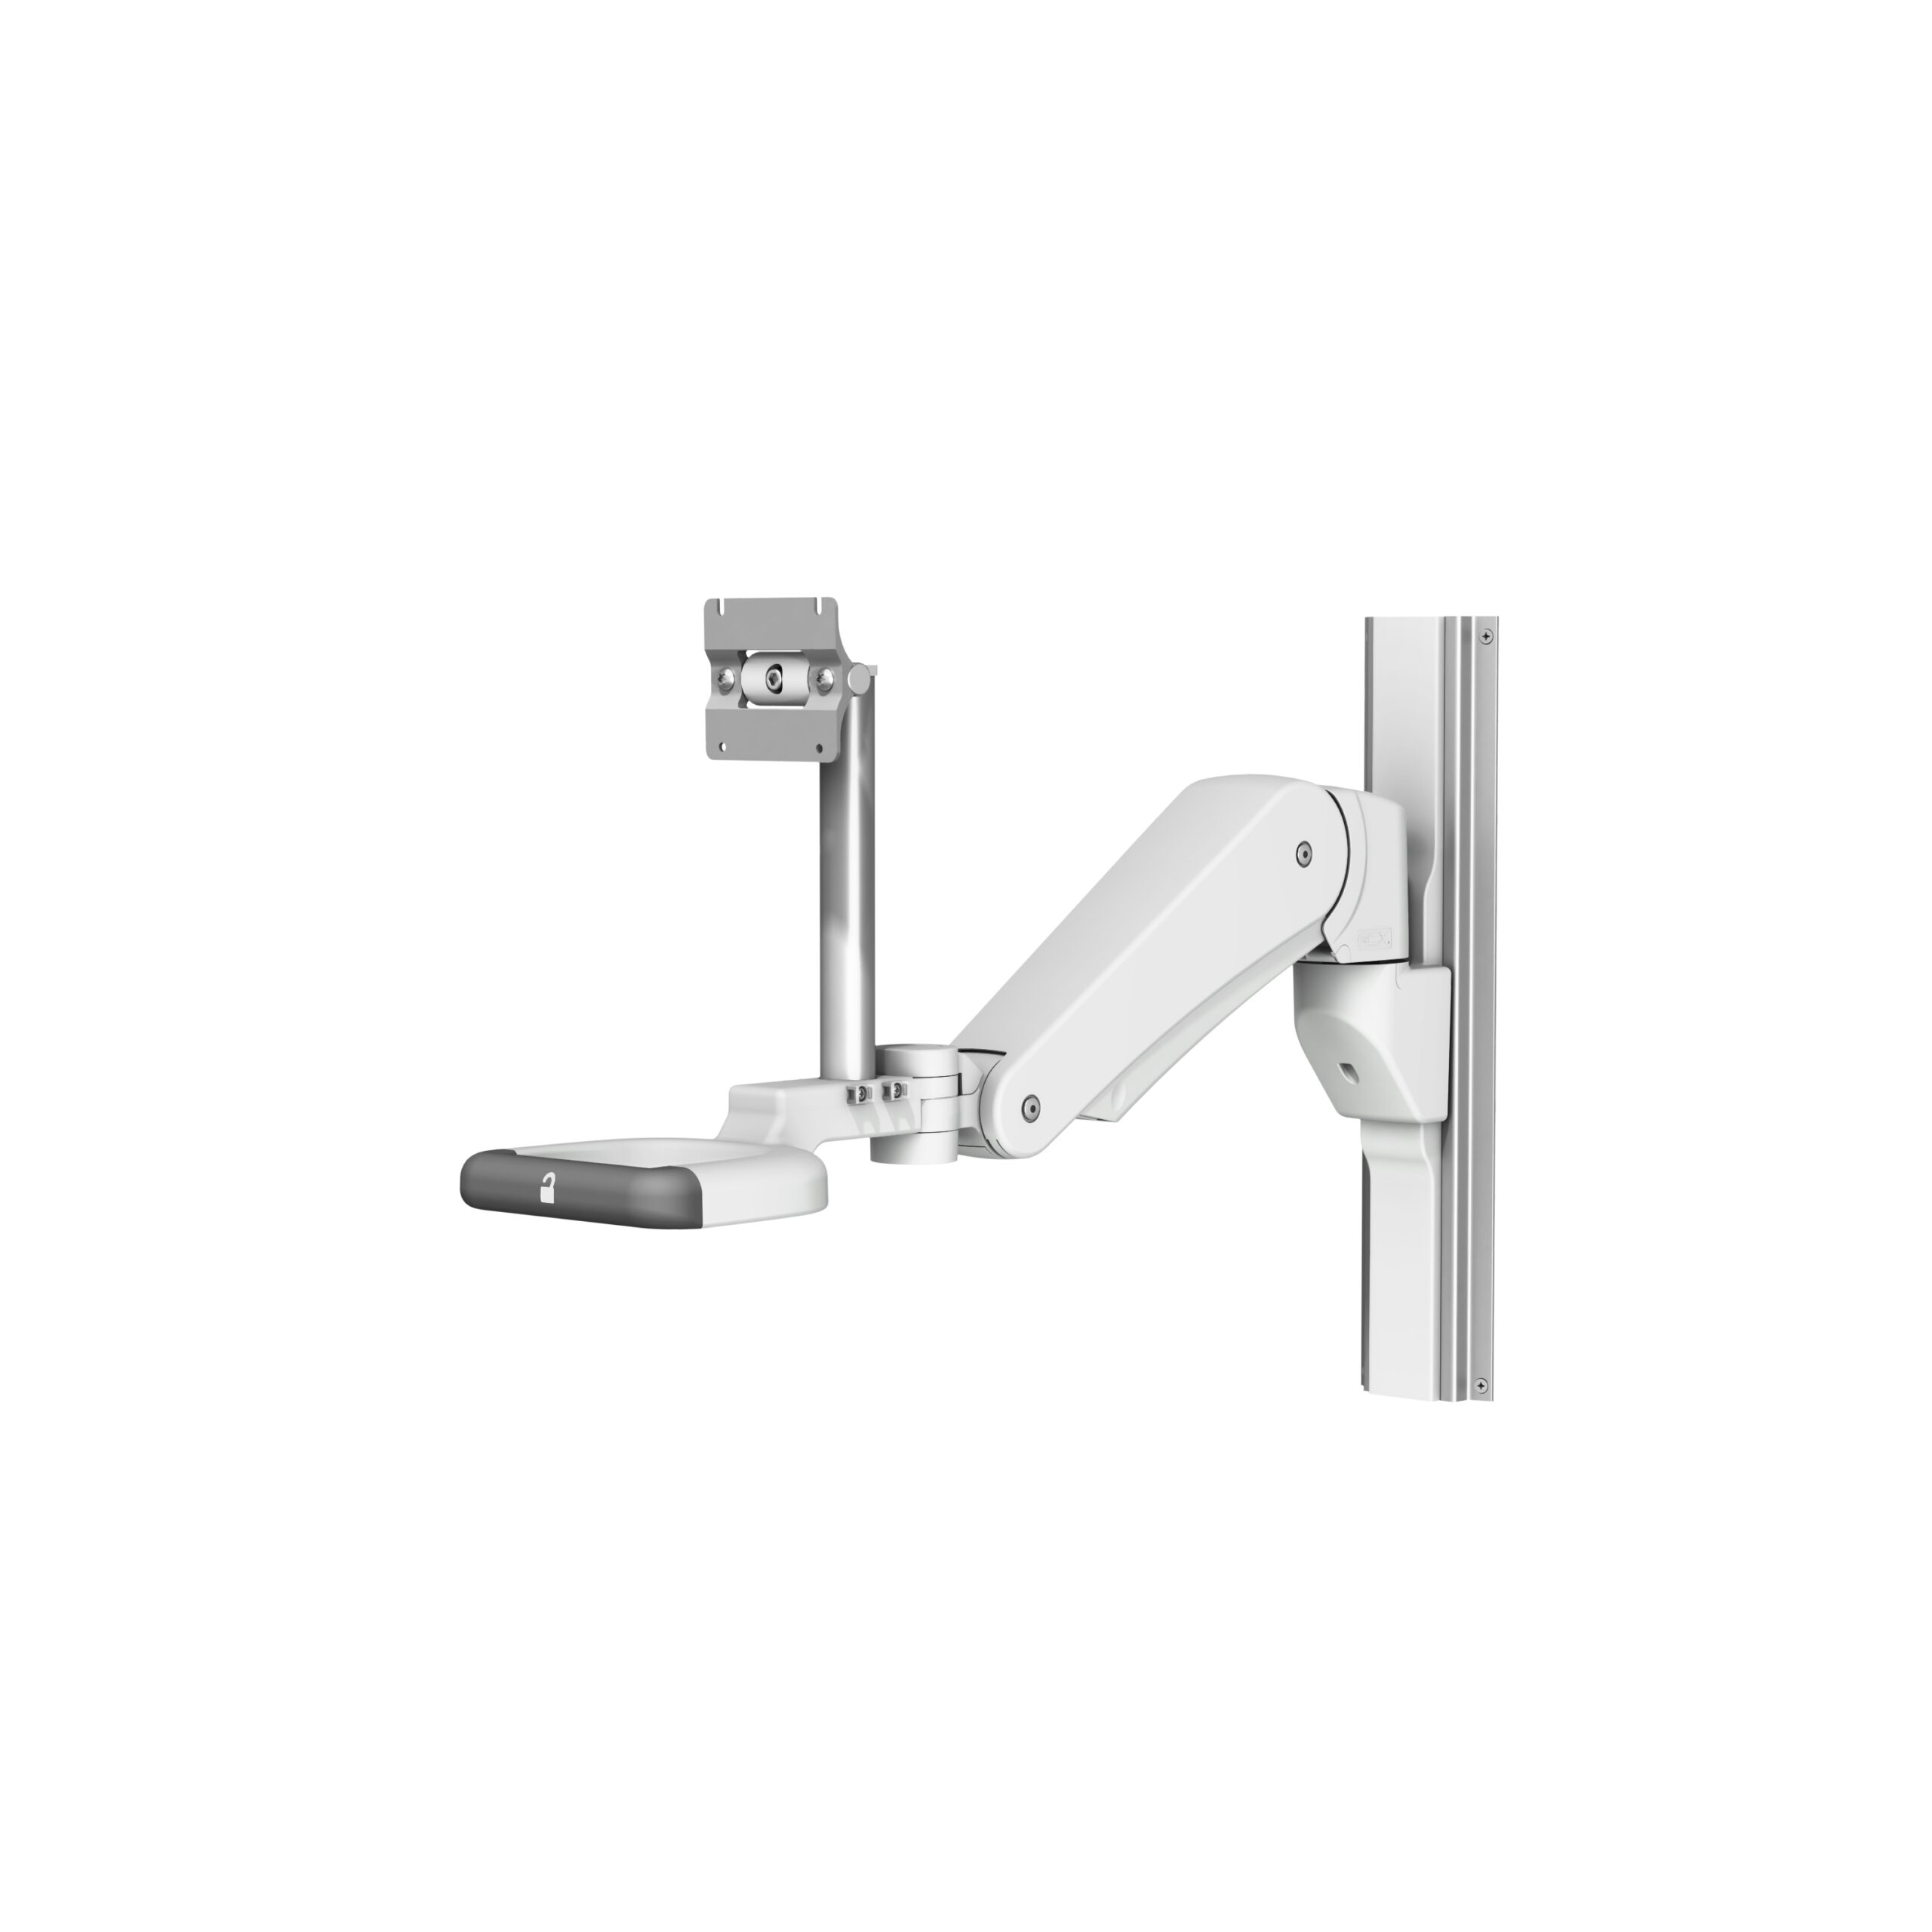 VHM-PL (Locking) Variable Height Arm with 9